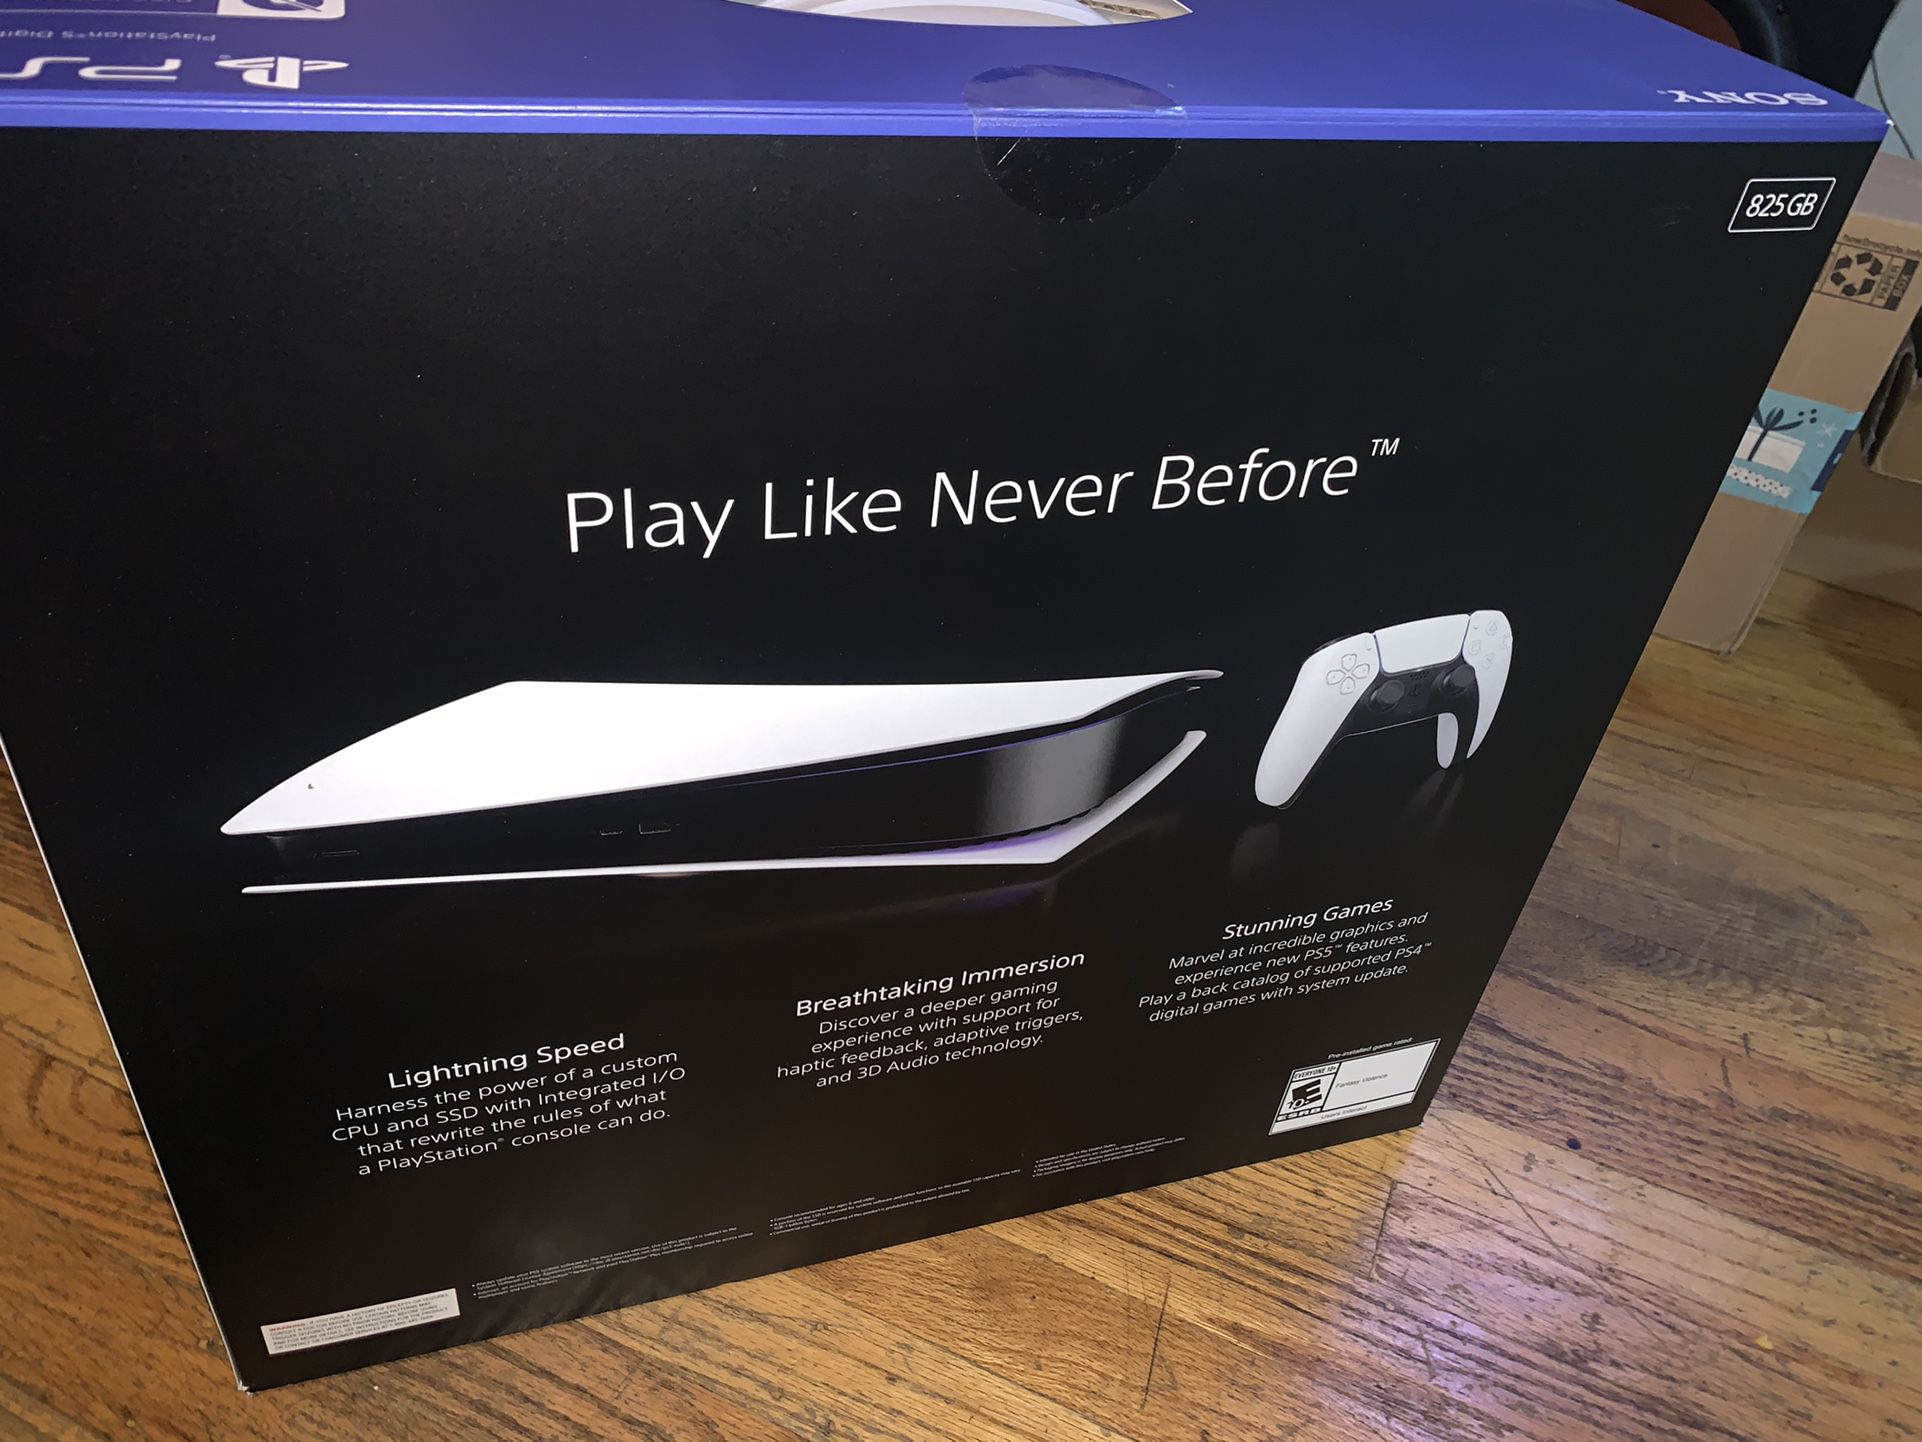 Sony PlayStation Portal Remote Player Controller For Your Ps5 System BRAND  NEW - SEALED - IN HAND for Sale in Scotch Plains, NJ - OfferUp